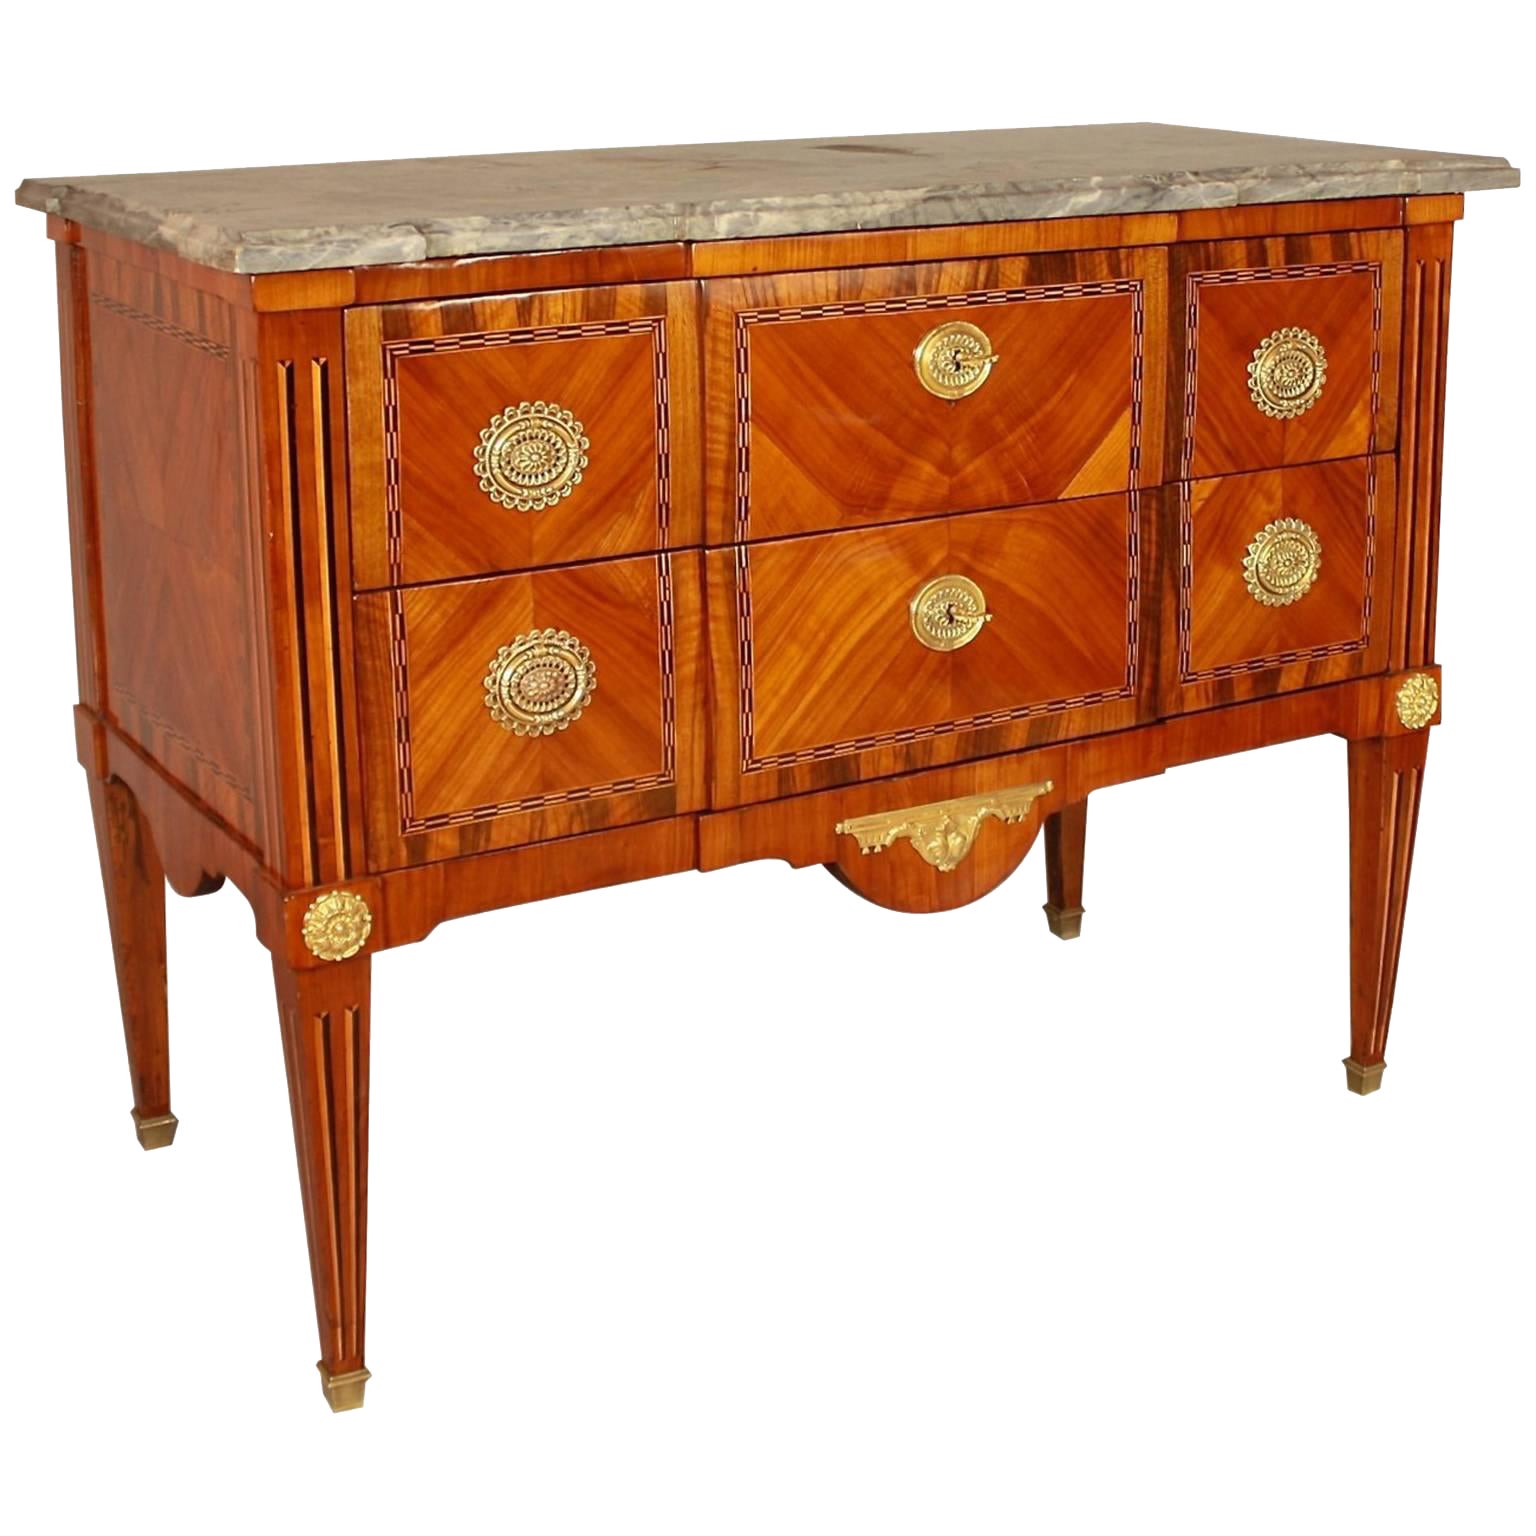 18th Century French Louis XVI Gilt-Bronze Mounted Geometrical Marquetry Commode For Sale